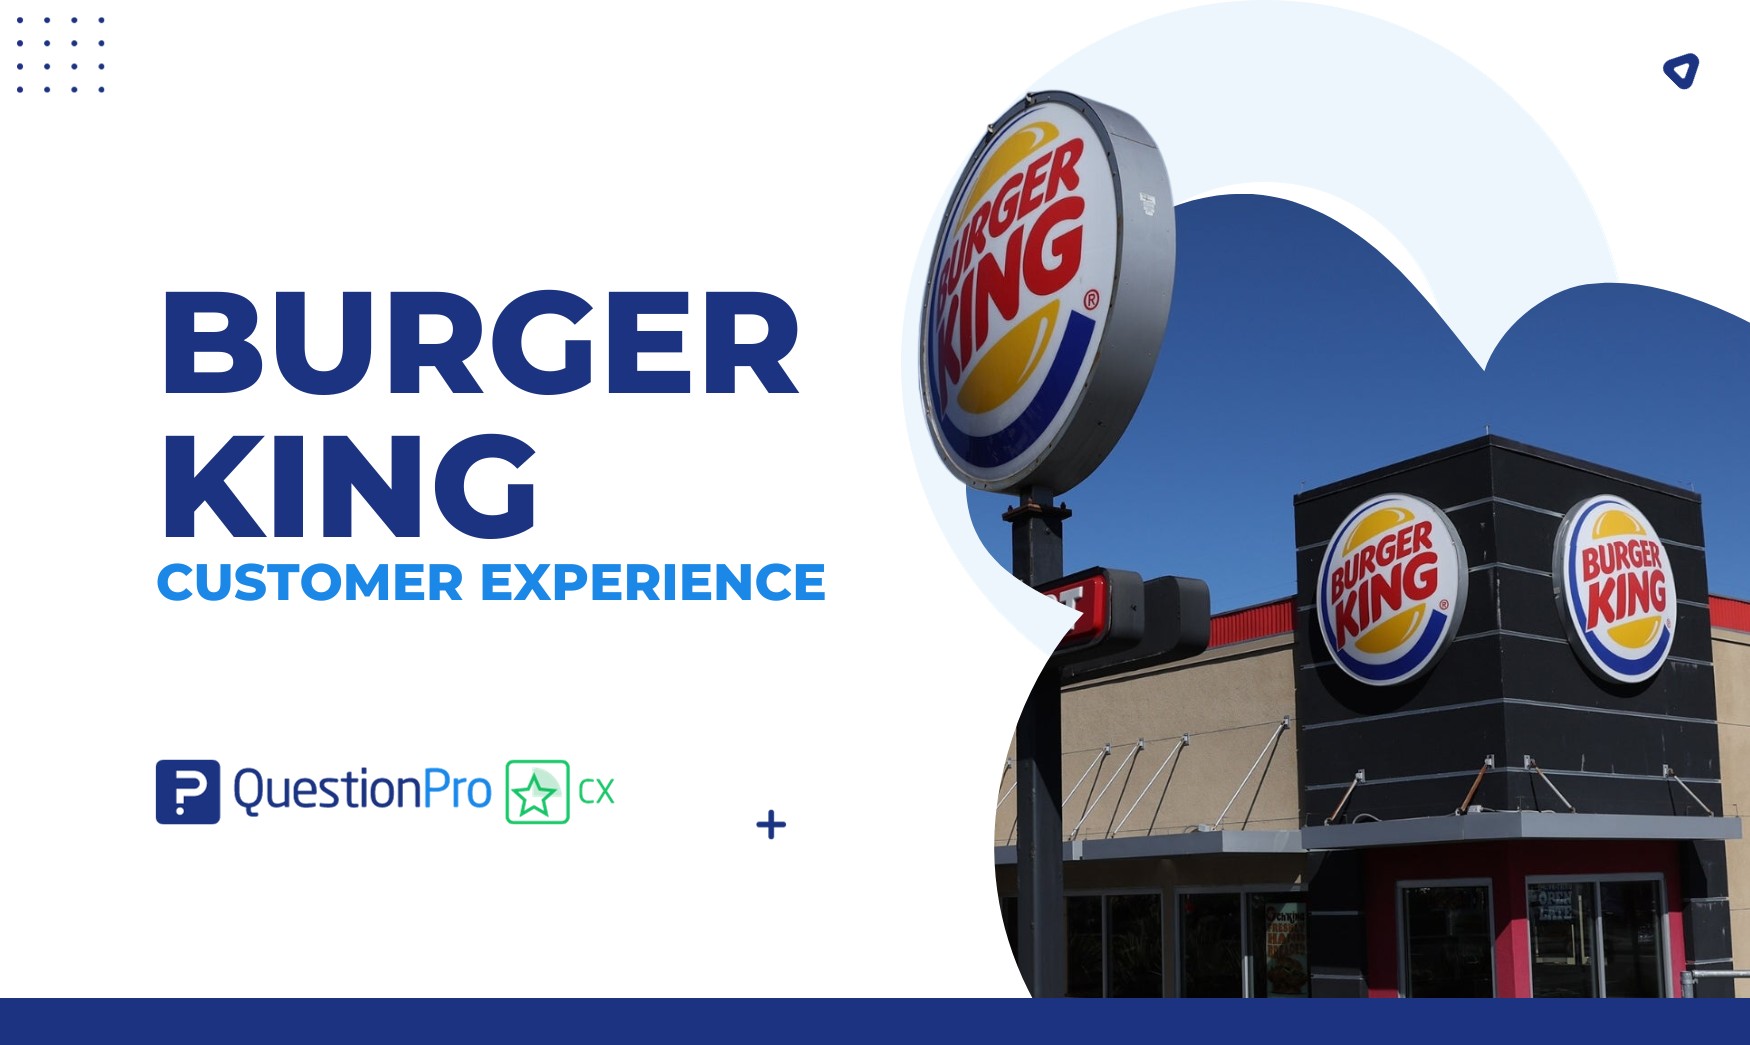 Elevate your business with insights from the Burger King customer experience and journey map approach with QuestionPro's CX suite.